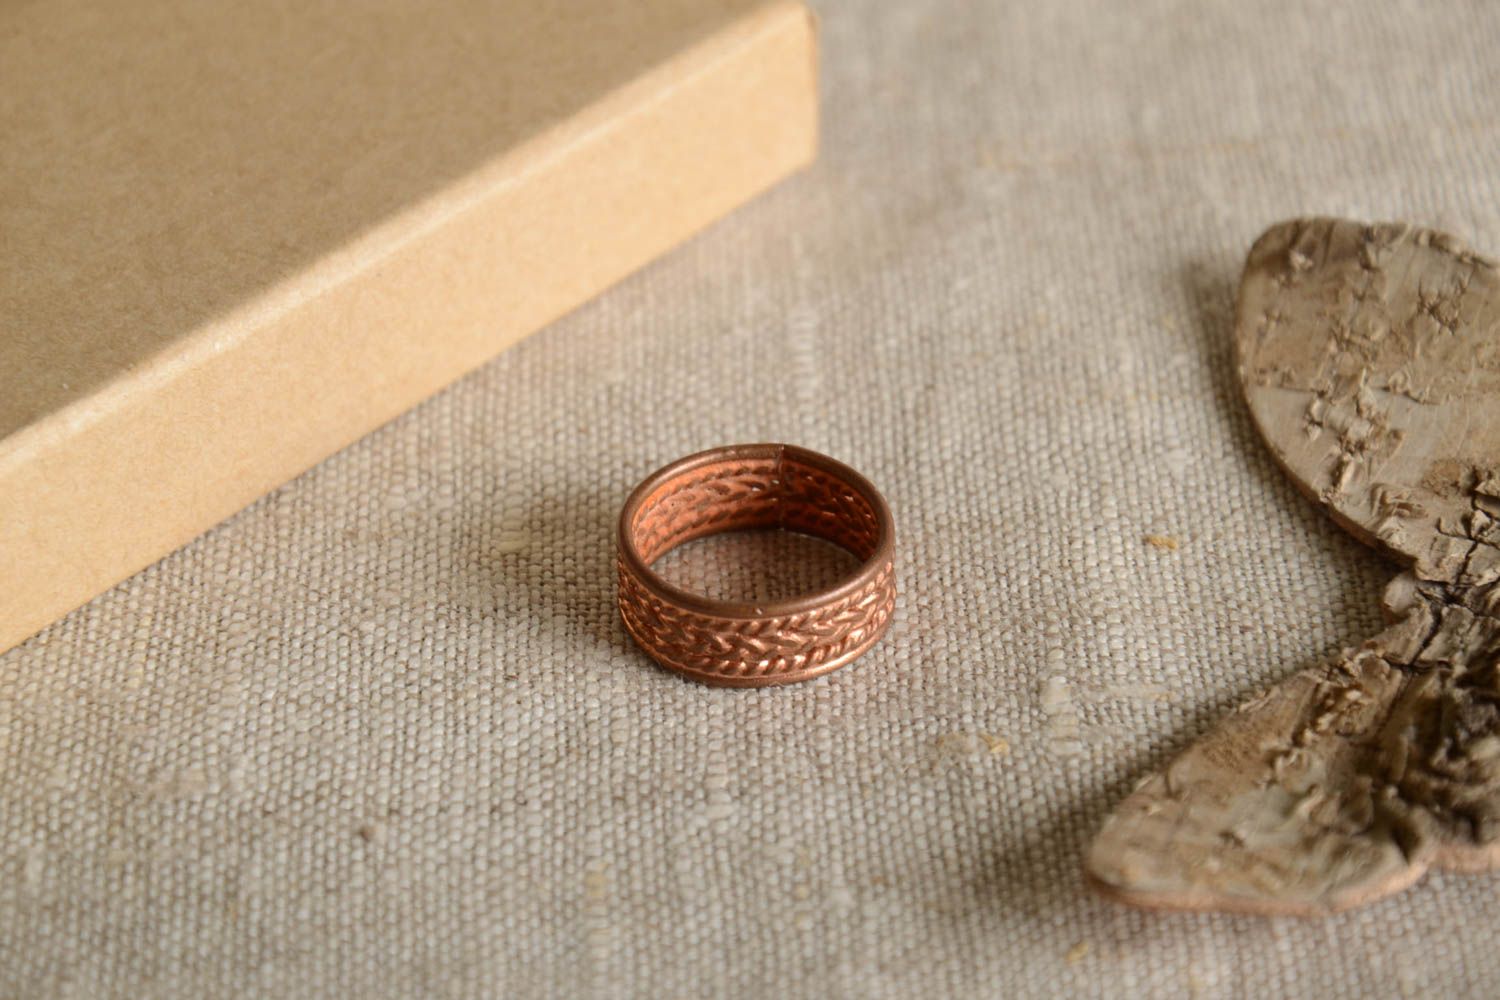 Stylish handmade copper ring metal ring design accessories for girls gift ideas photo 1